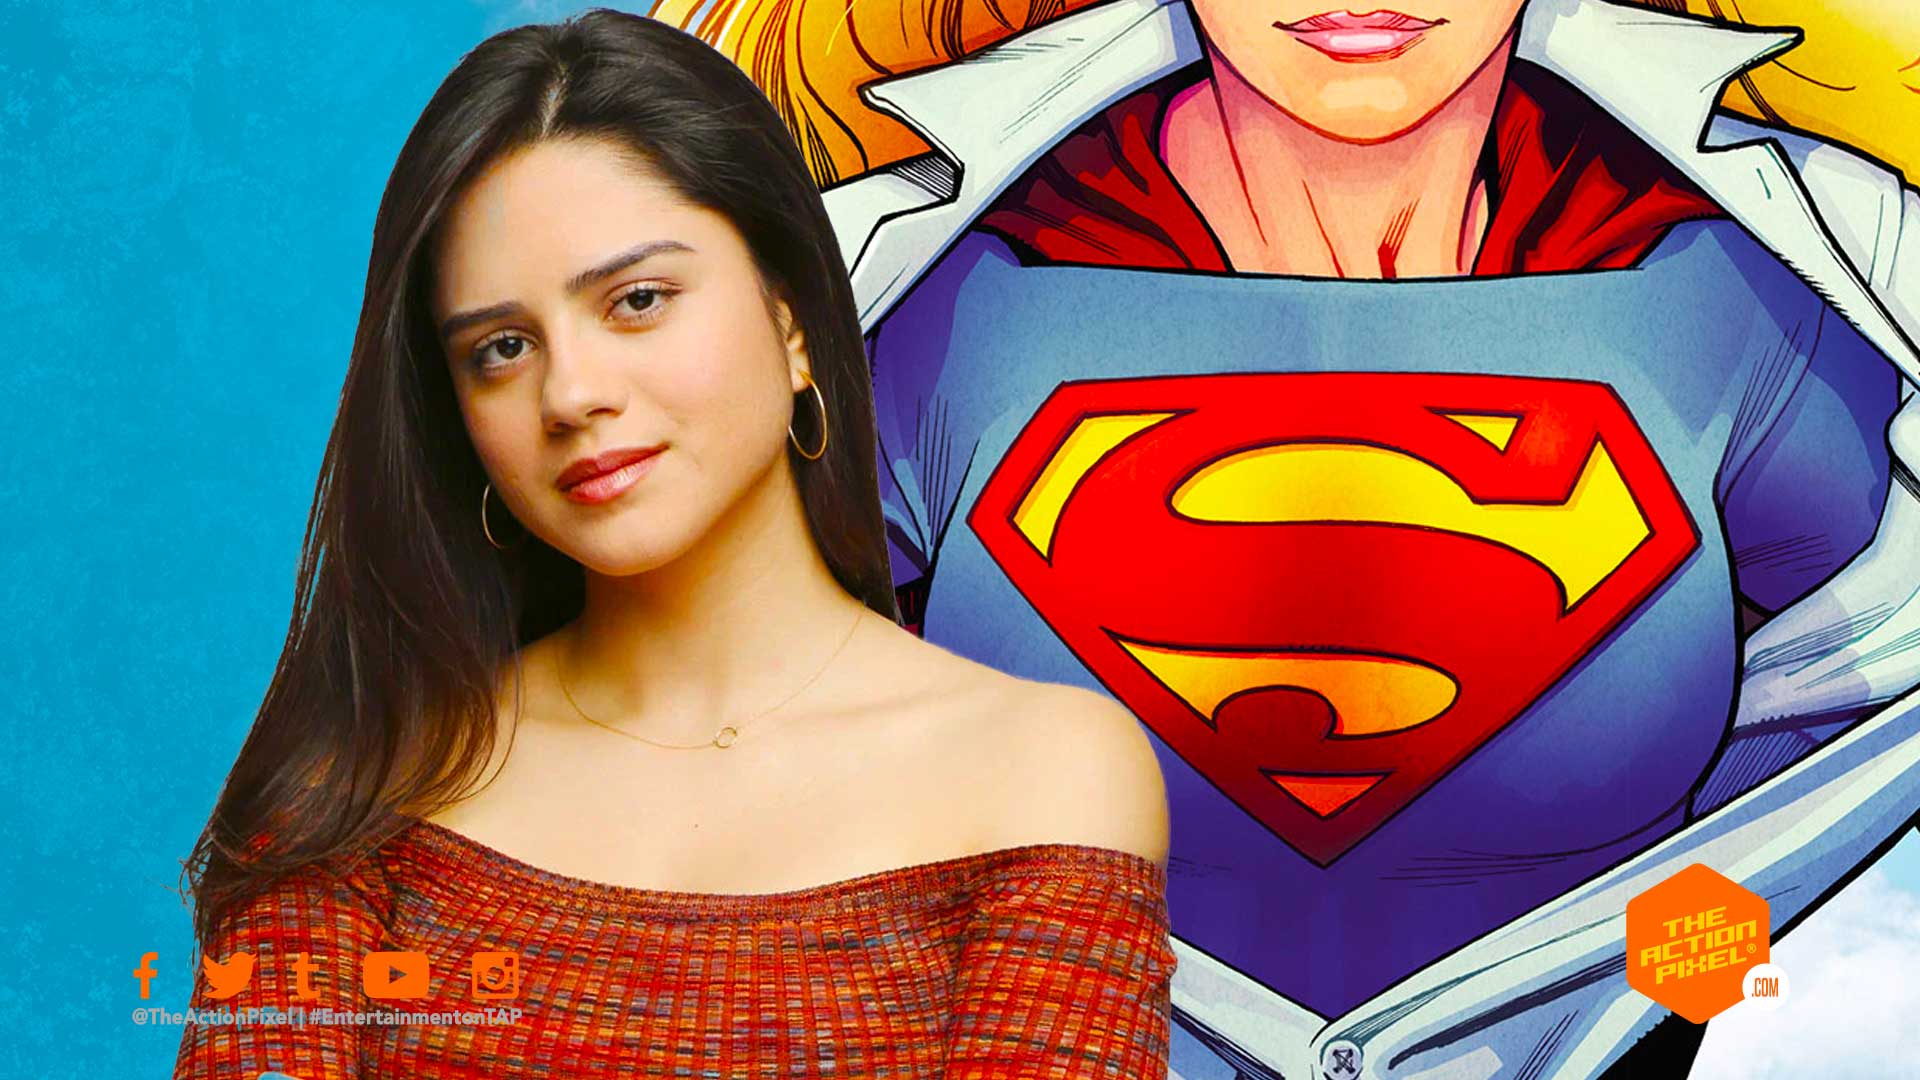 Sasha Calle gets cast as Supergirl in coming “Flash” movie